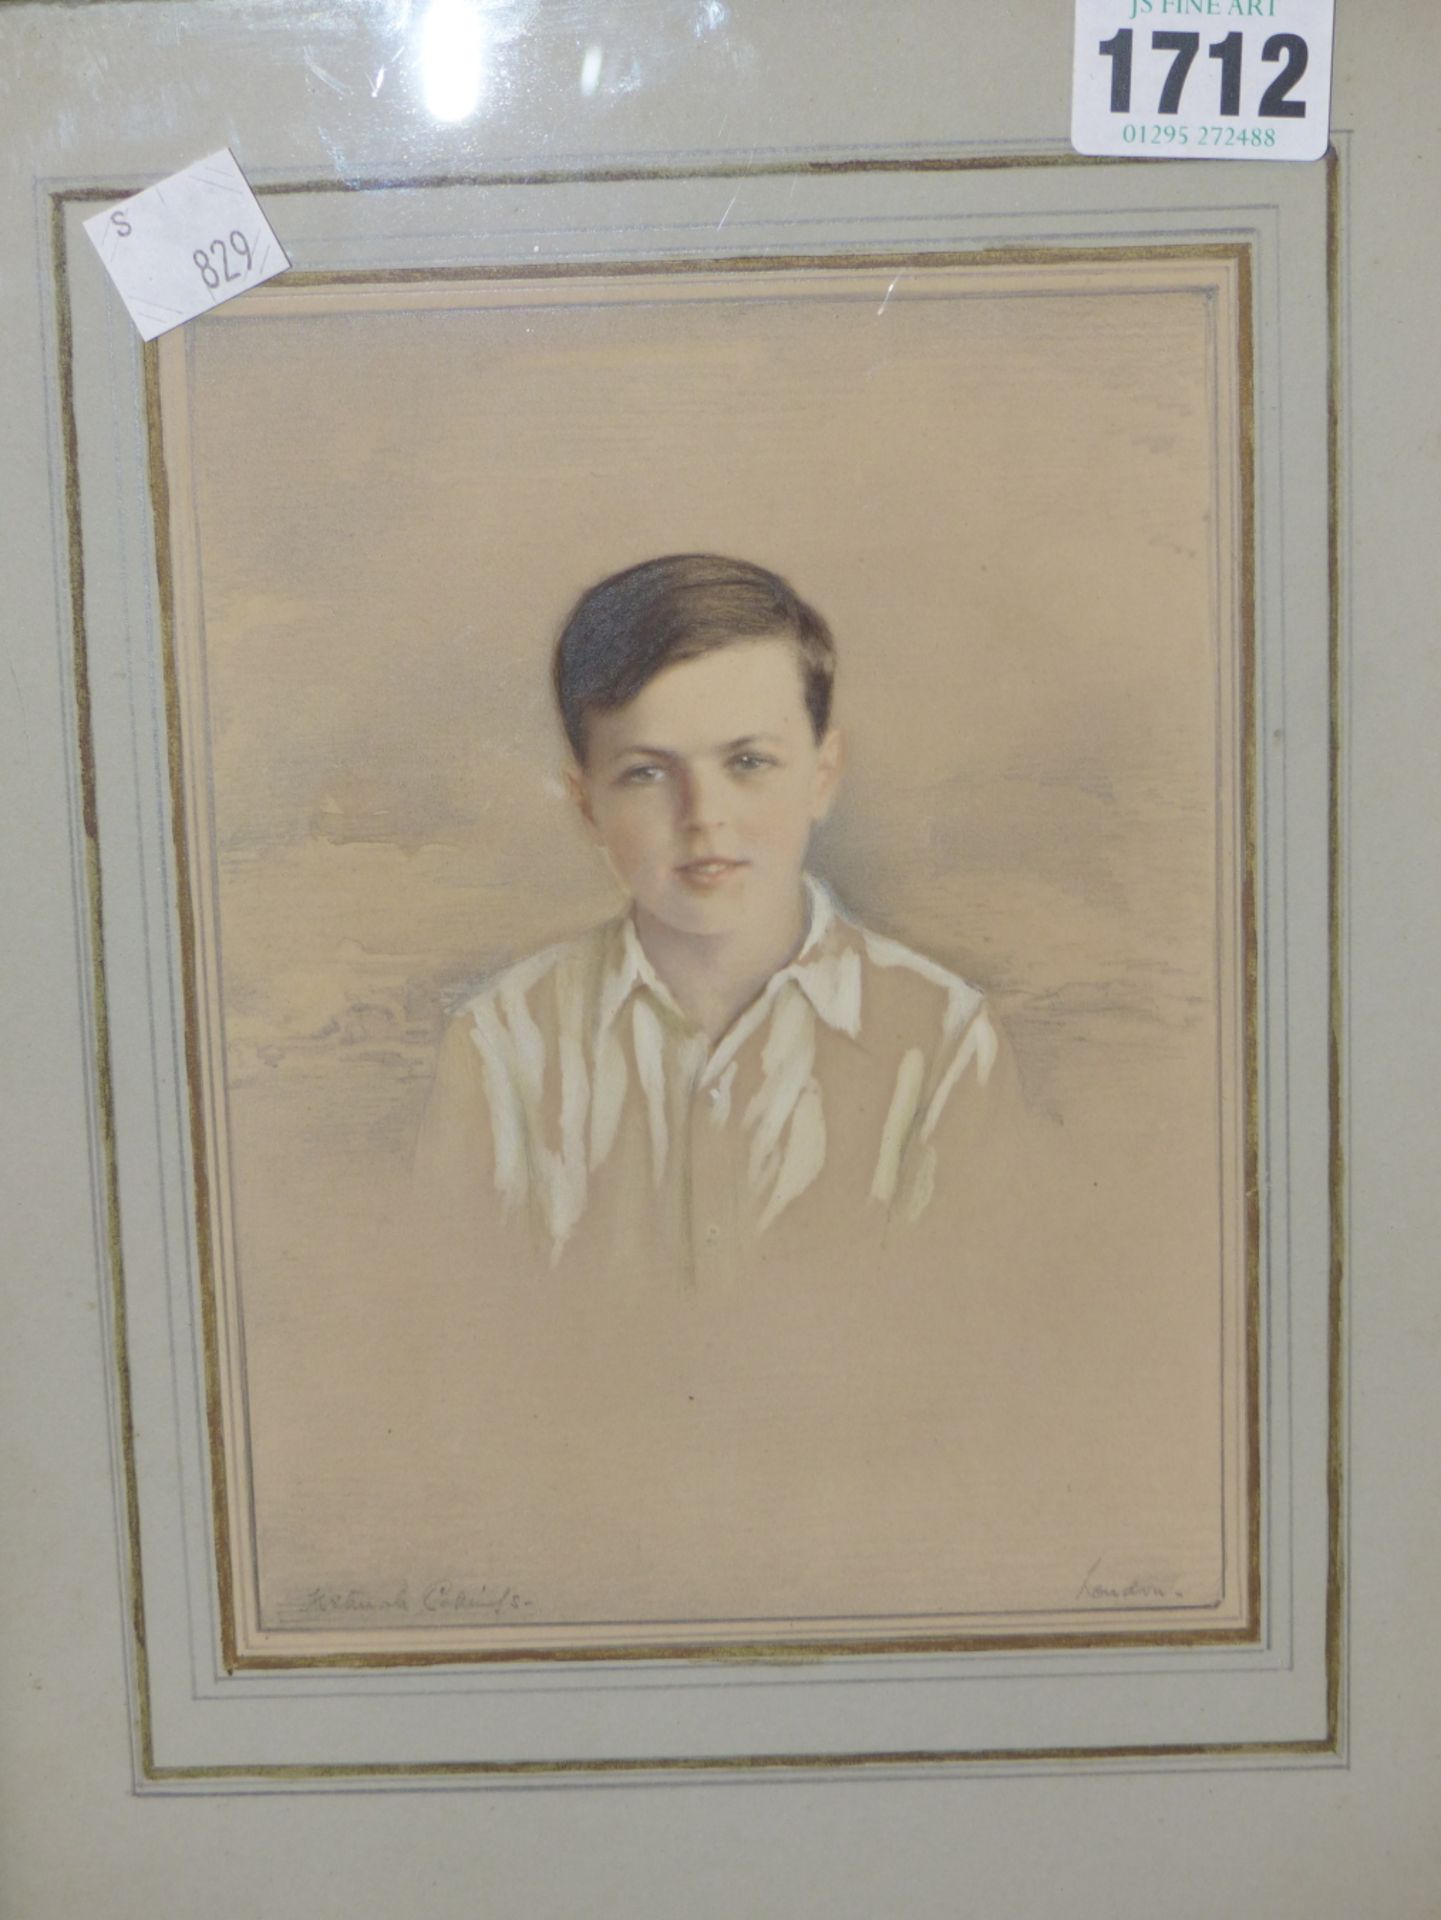 KETURAH ANN COLLINGS, BRITISH 1862-1948. PORTRAIT OF A BOY DATED 1932 VERSO. GRAPHITE AND WASH, 18 X - Image 2 of 3